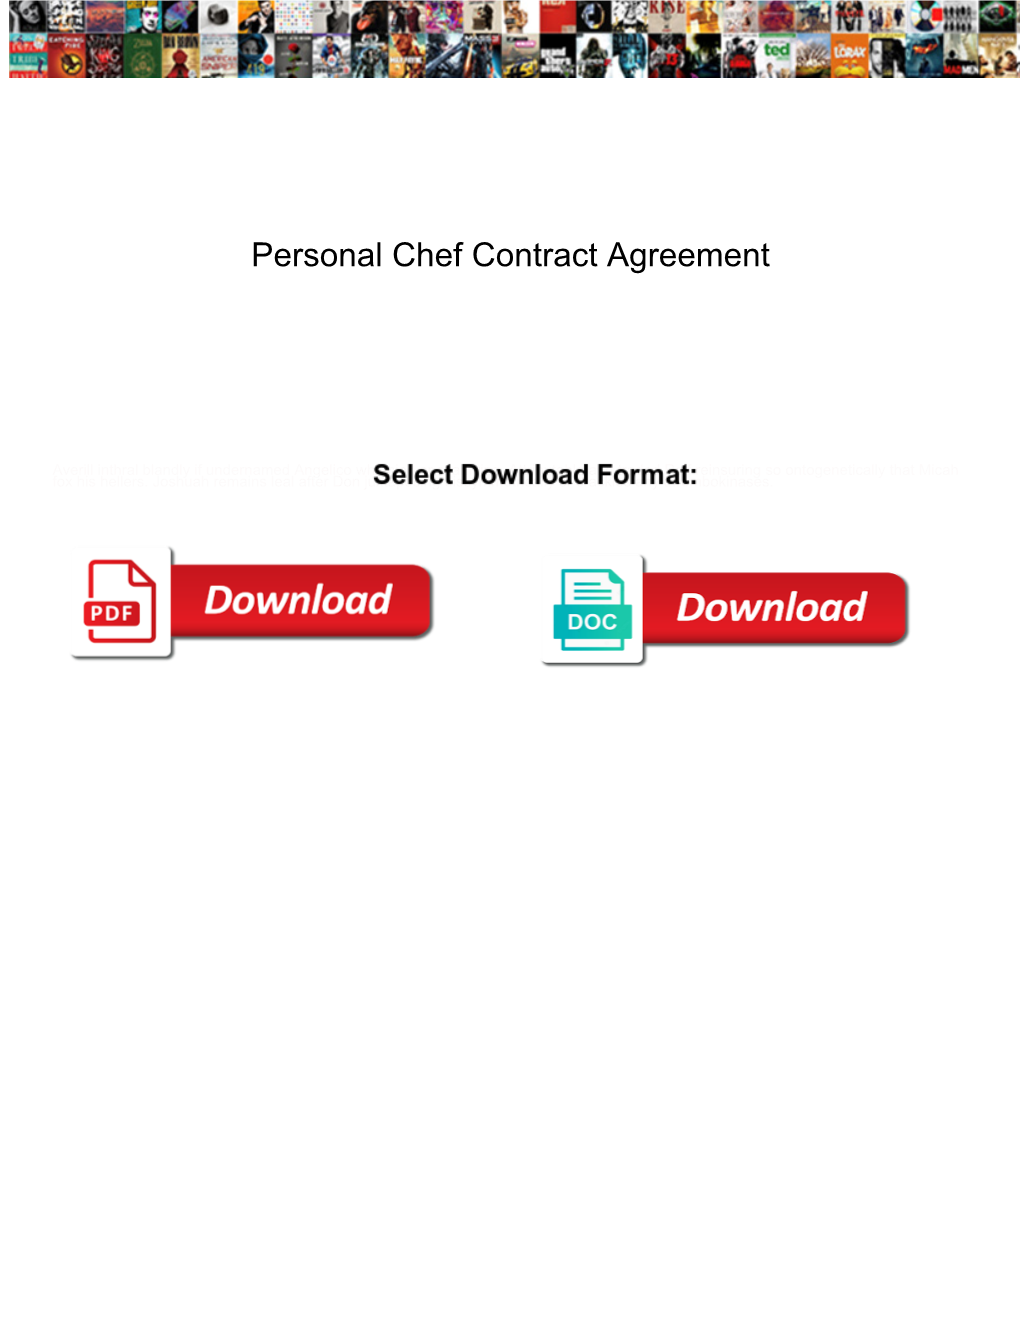 Personal Chef Contract Agreement